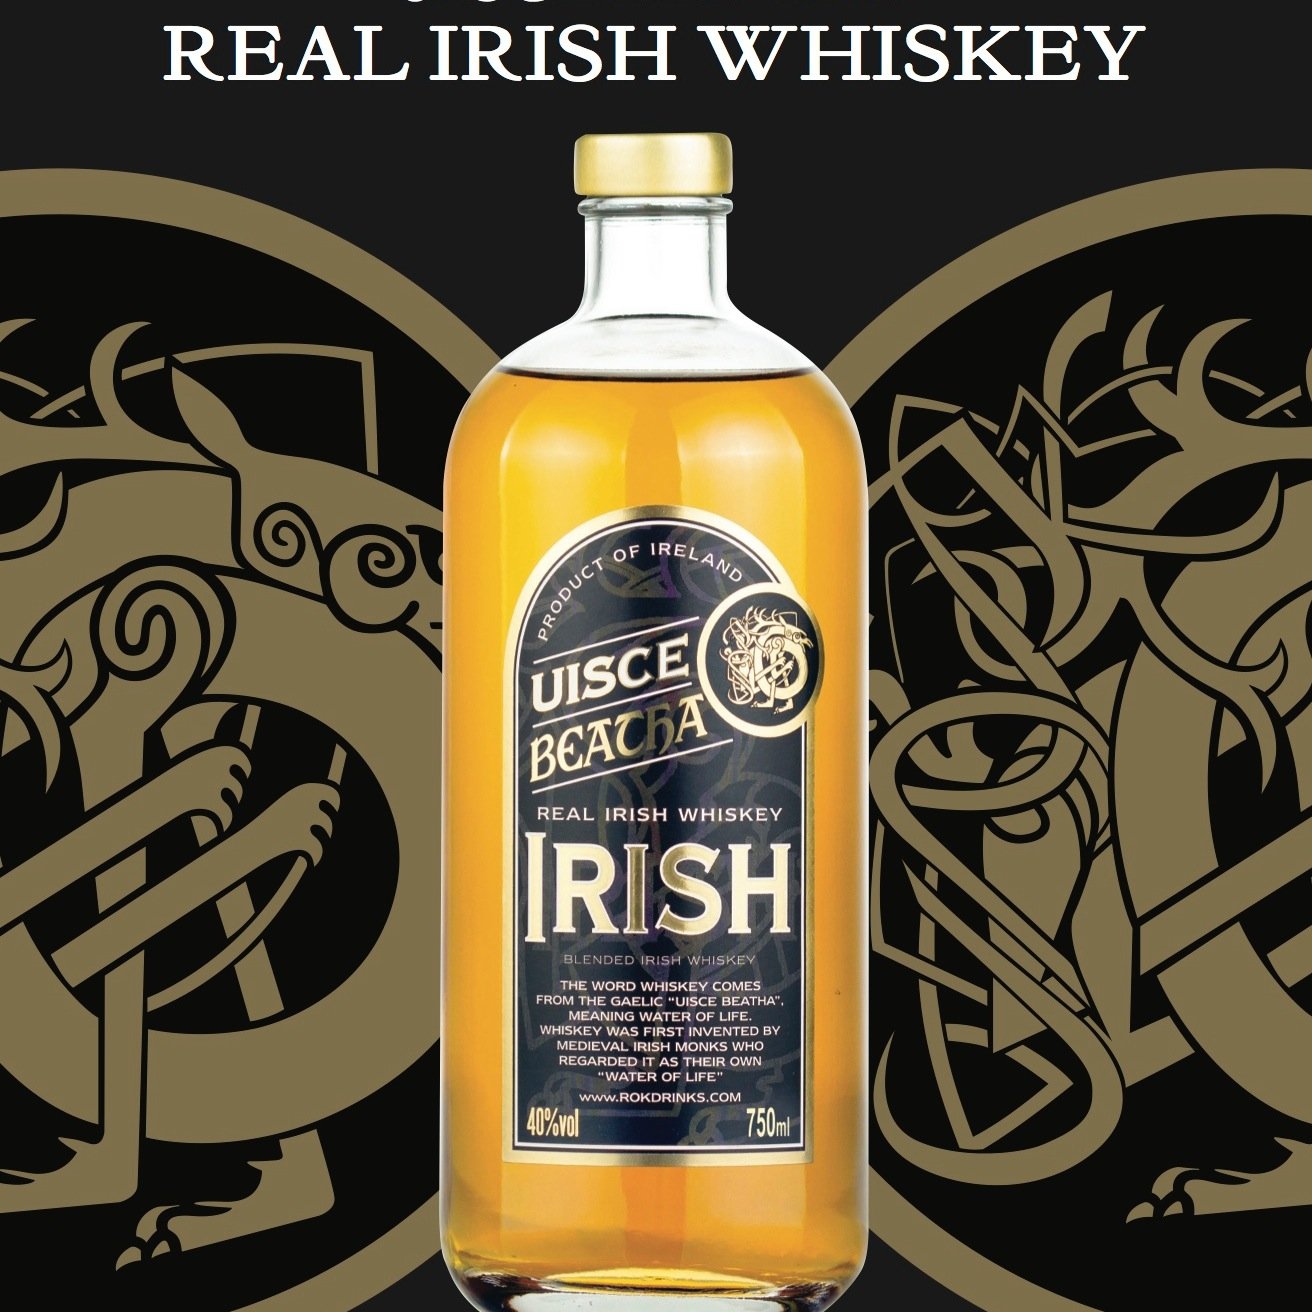 UB Real Irish Whiskey is a blended Irish whiskey with a characteristically smooth, round spirit overlaid with the influence of ageing in oak casks.